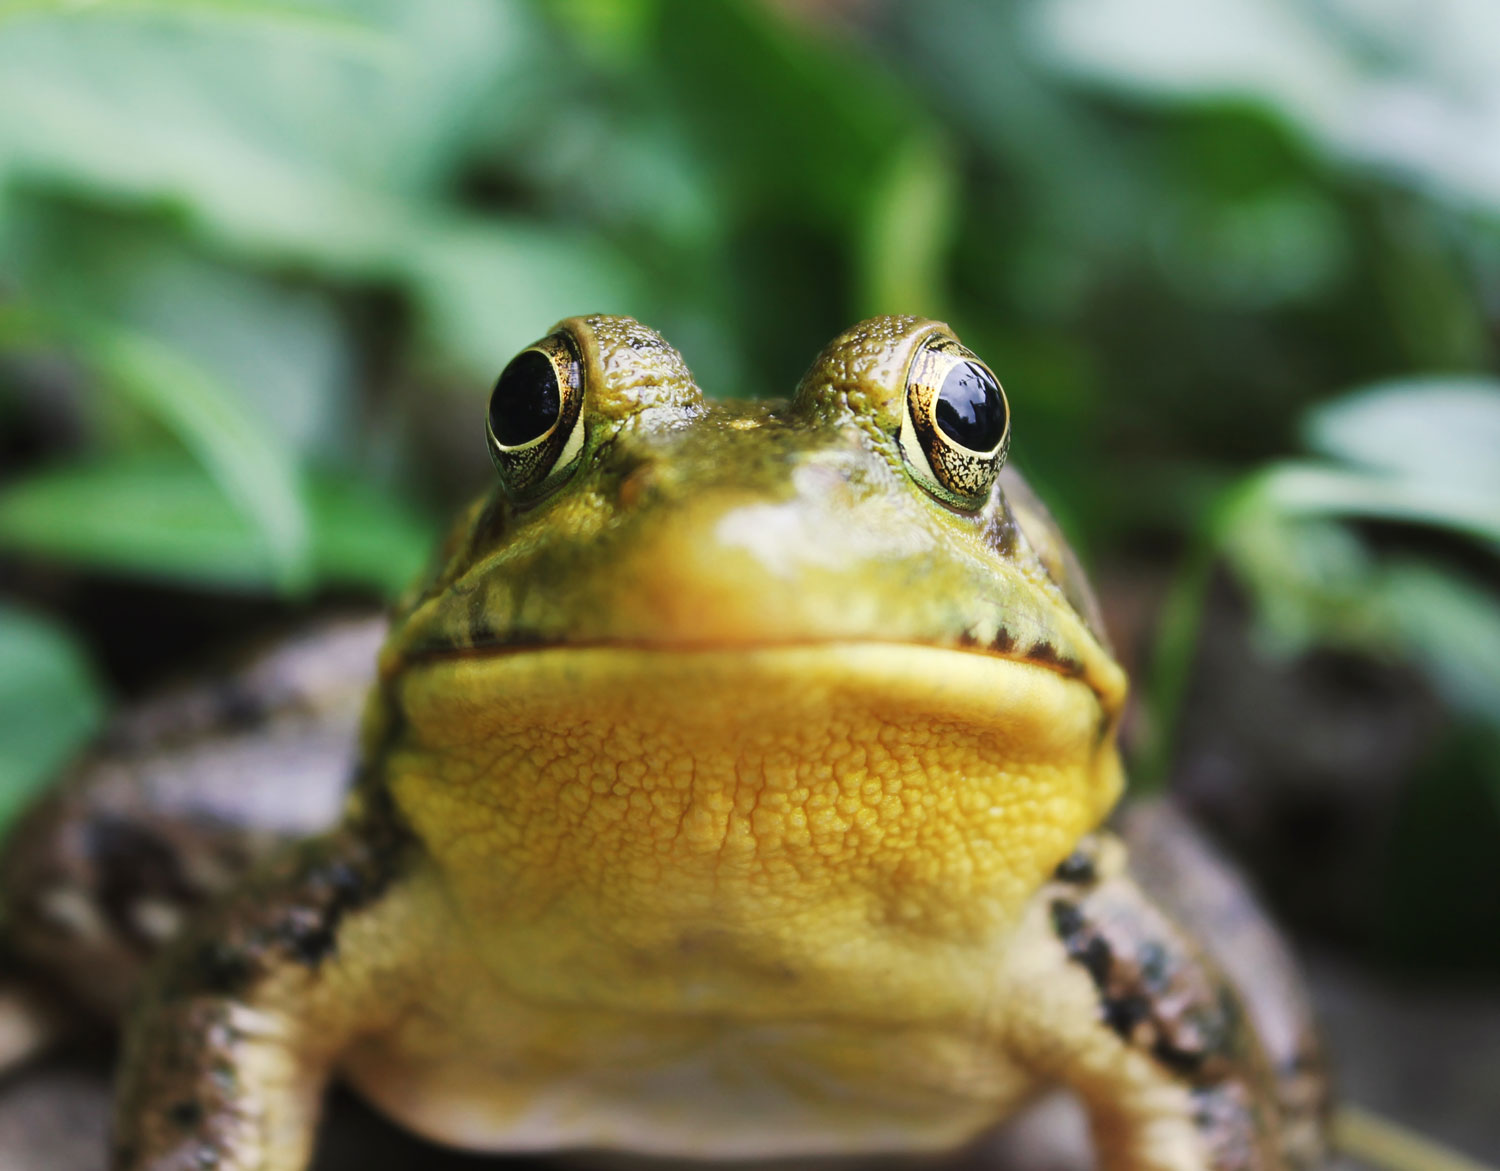 The Frog in Hot Water  by T. Jacira Paolino. Photo by Jack Hamilton on Unsplash